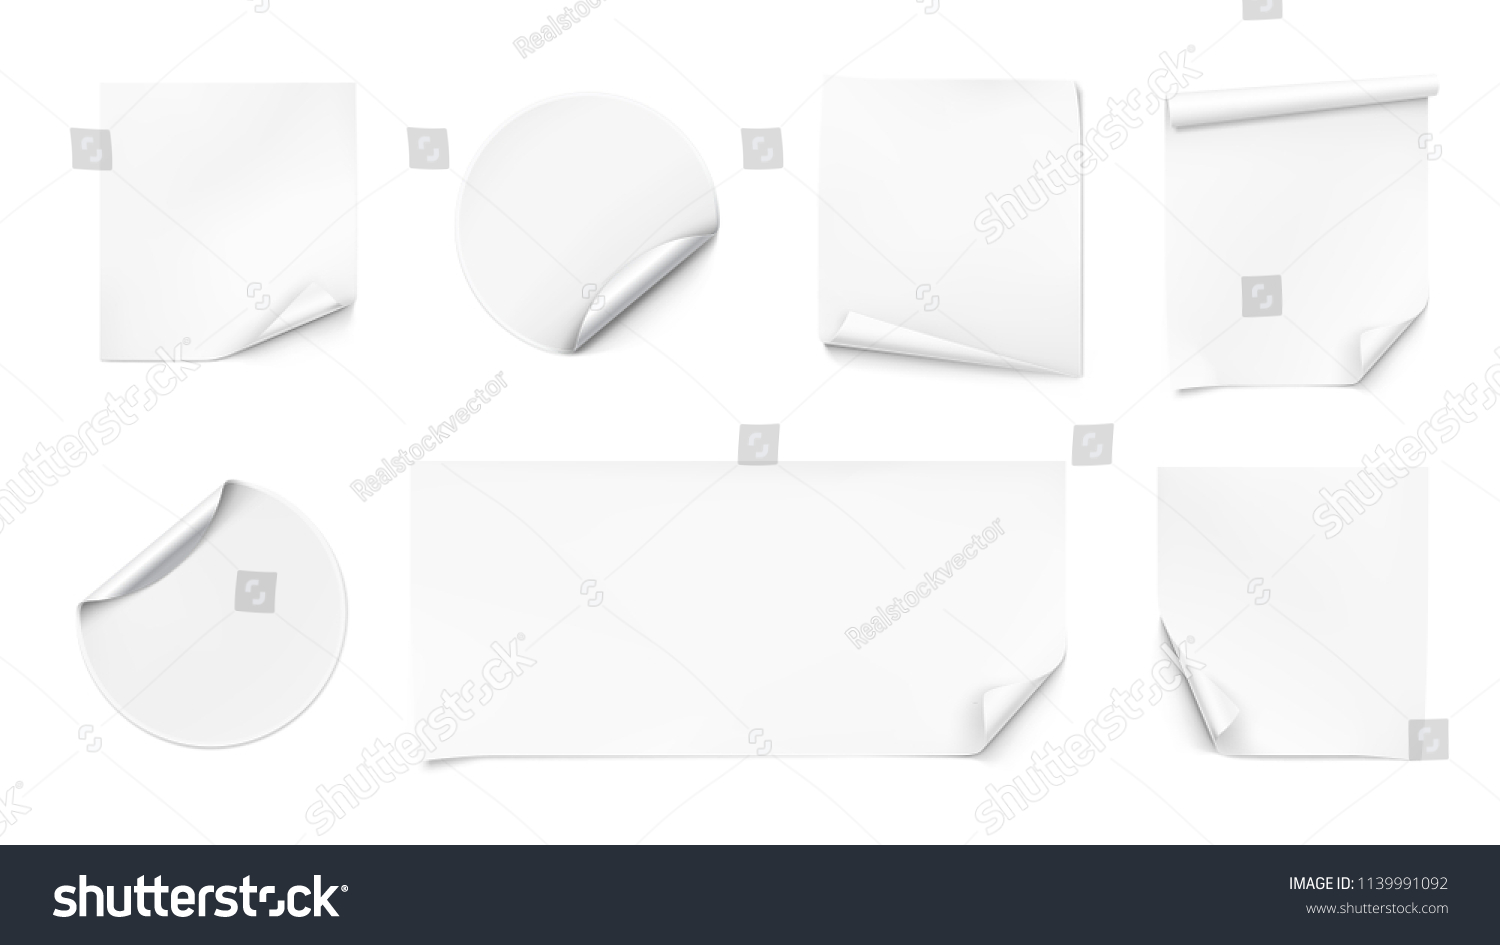 Set of curled stickers. Vector illustration isolated on white background. EPS10. #1139991092